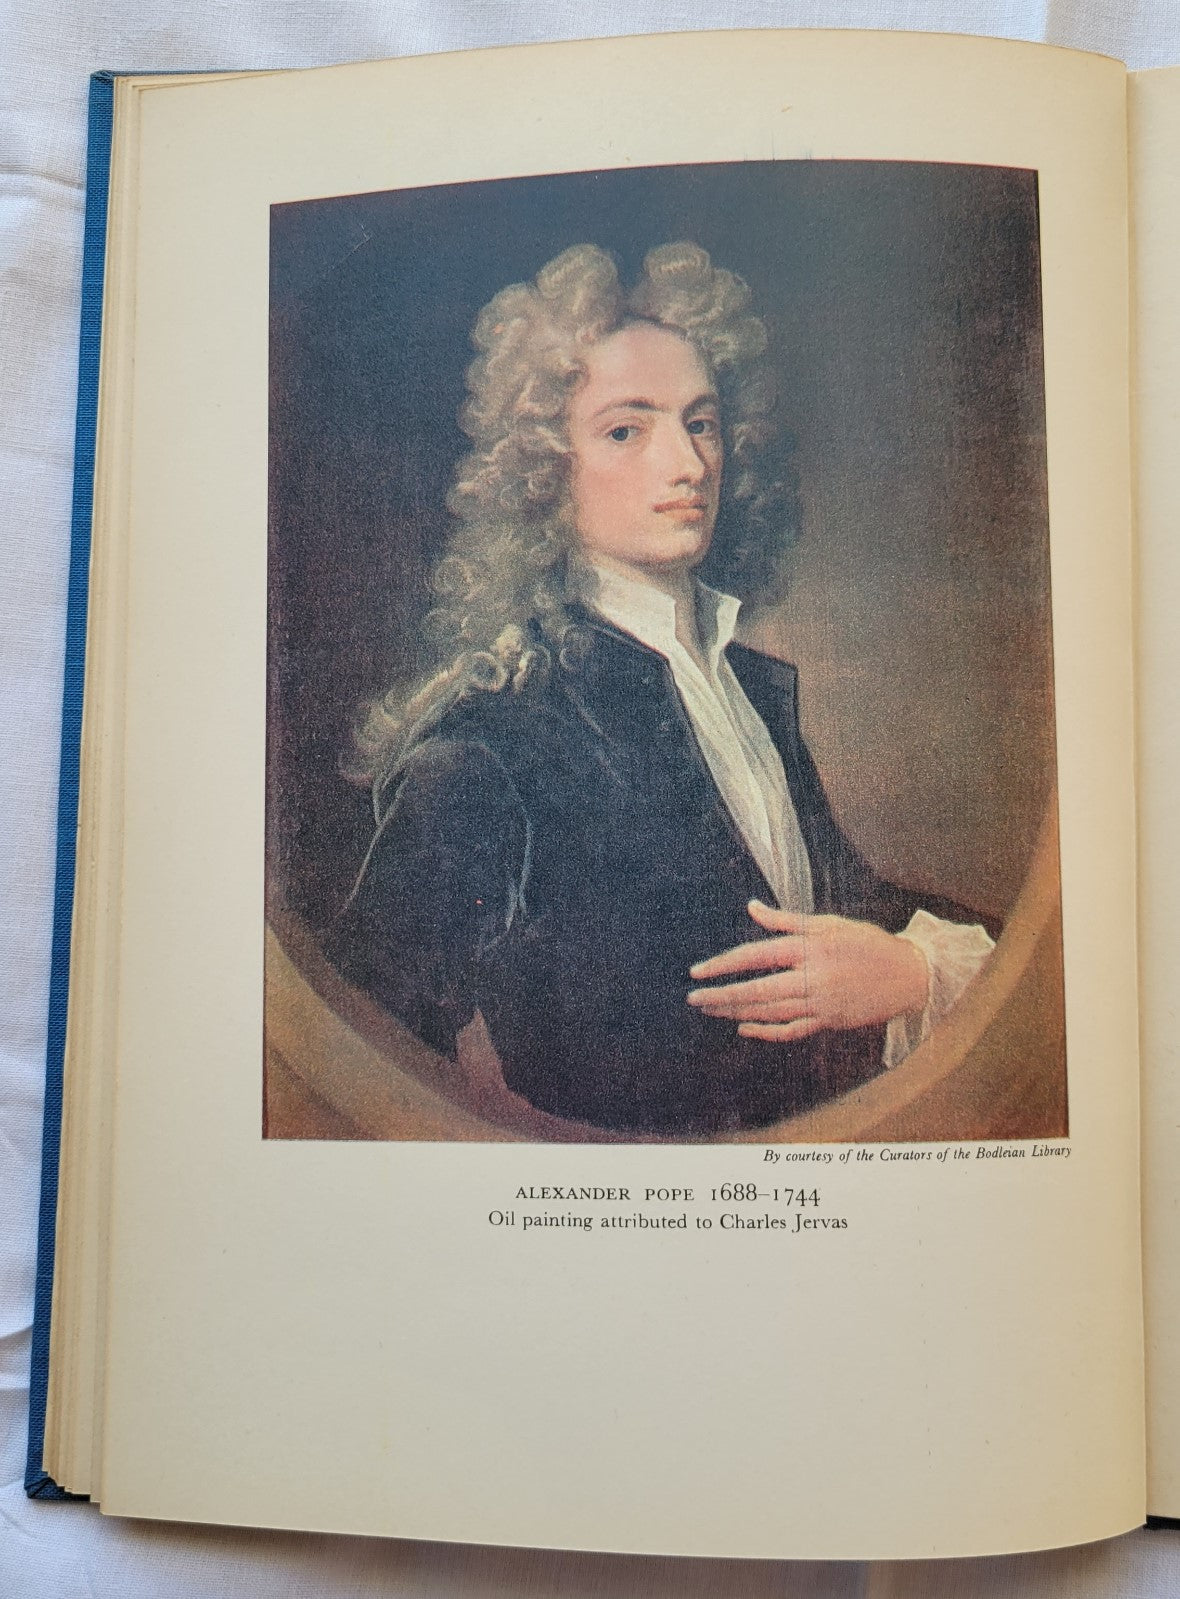 Vintage book for sale "The English Poets" by Lord David Cecil, published by Hastings House, 1940. Picture of Alexander Pope.